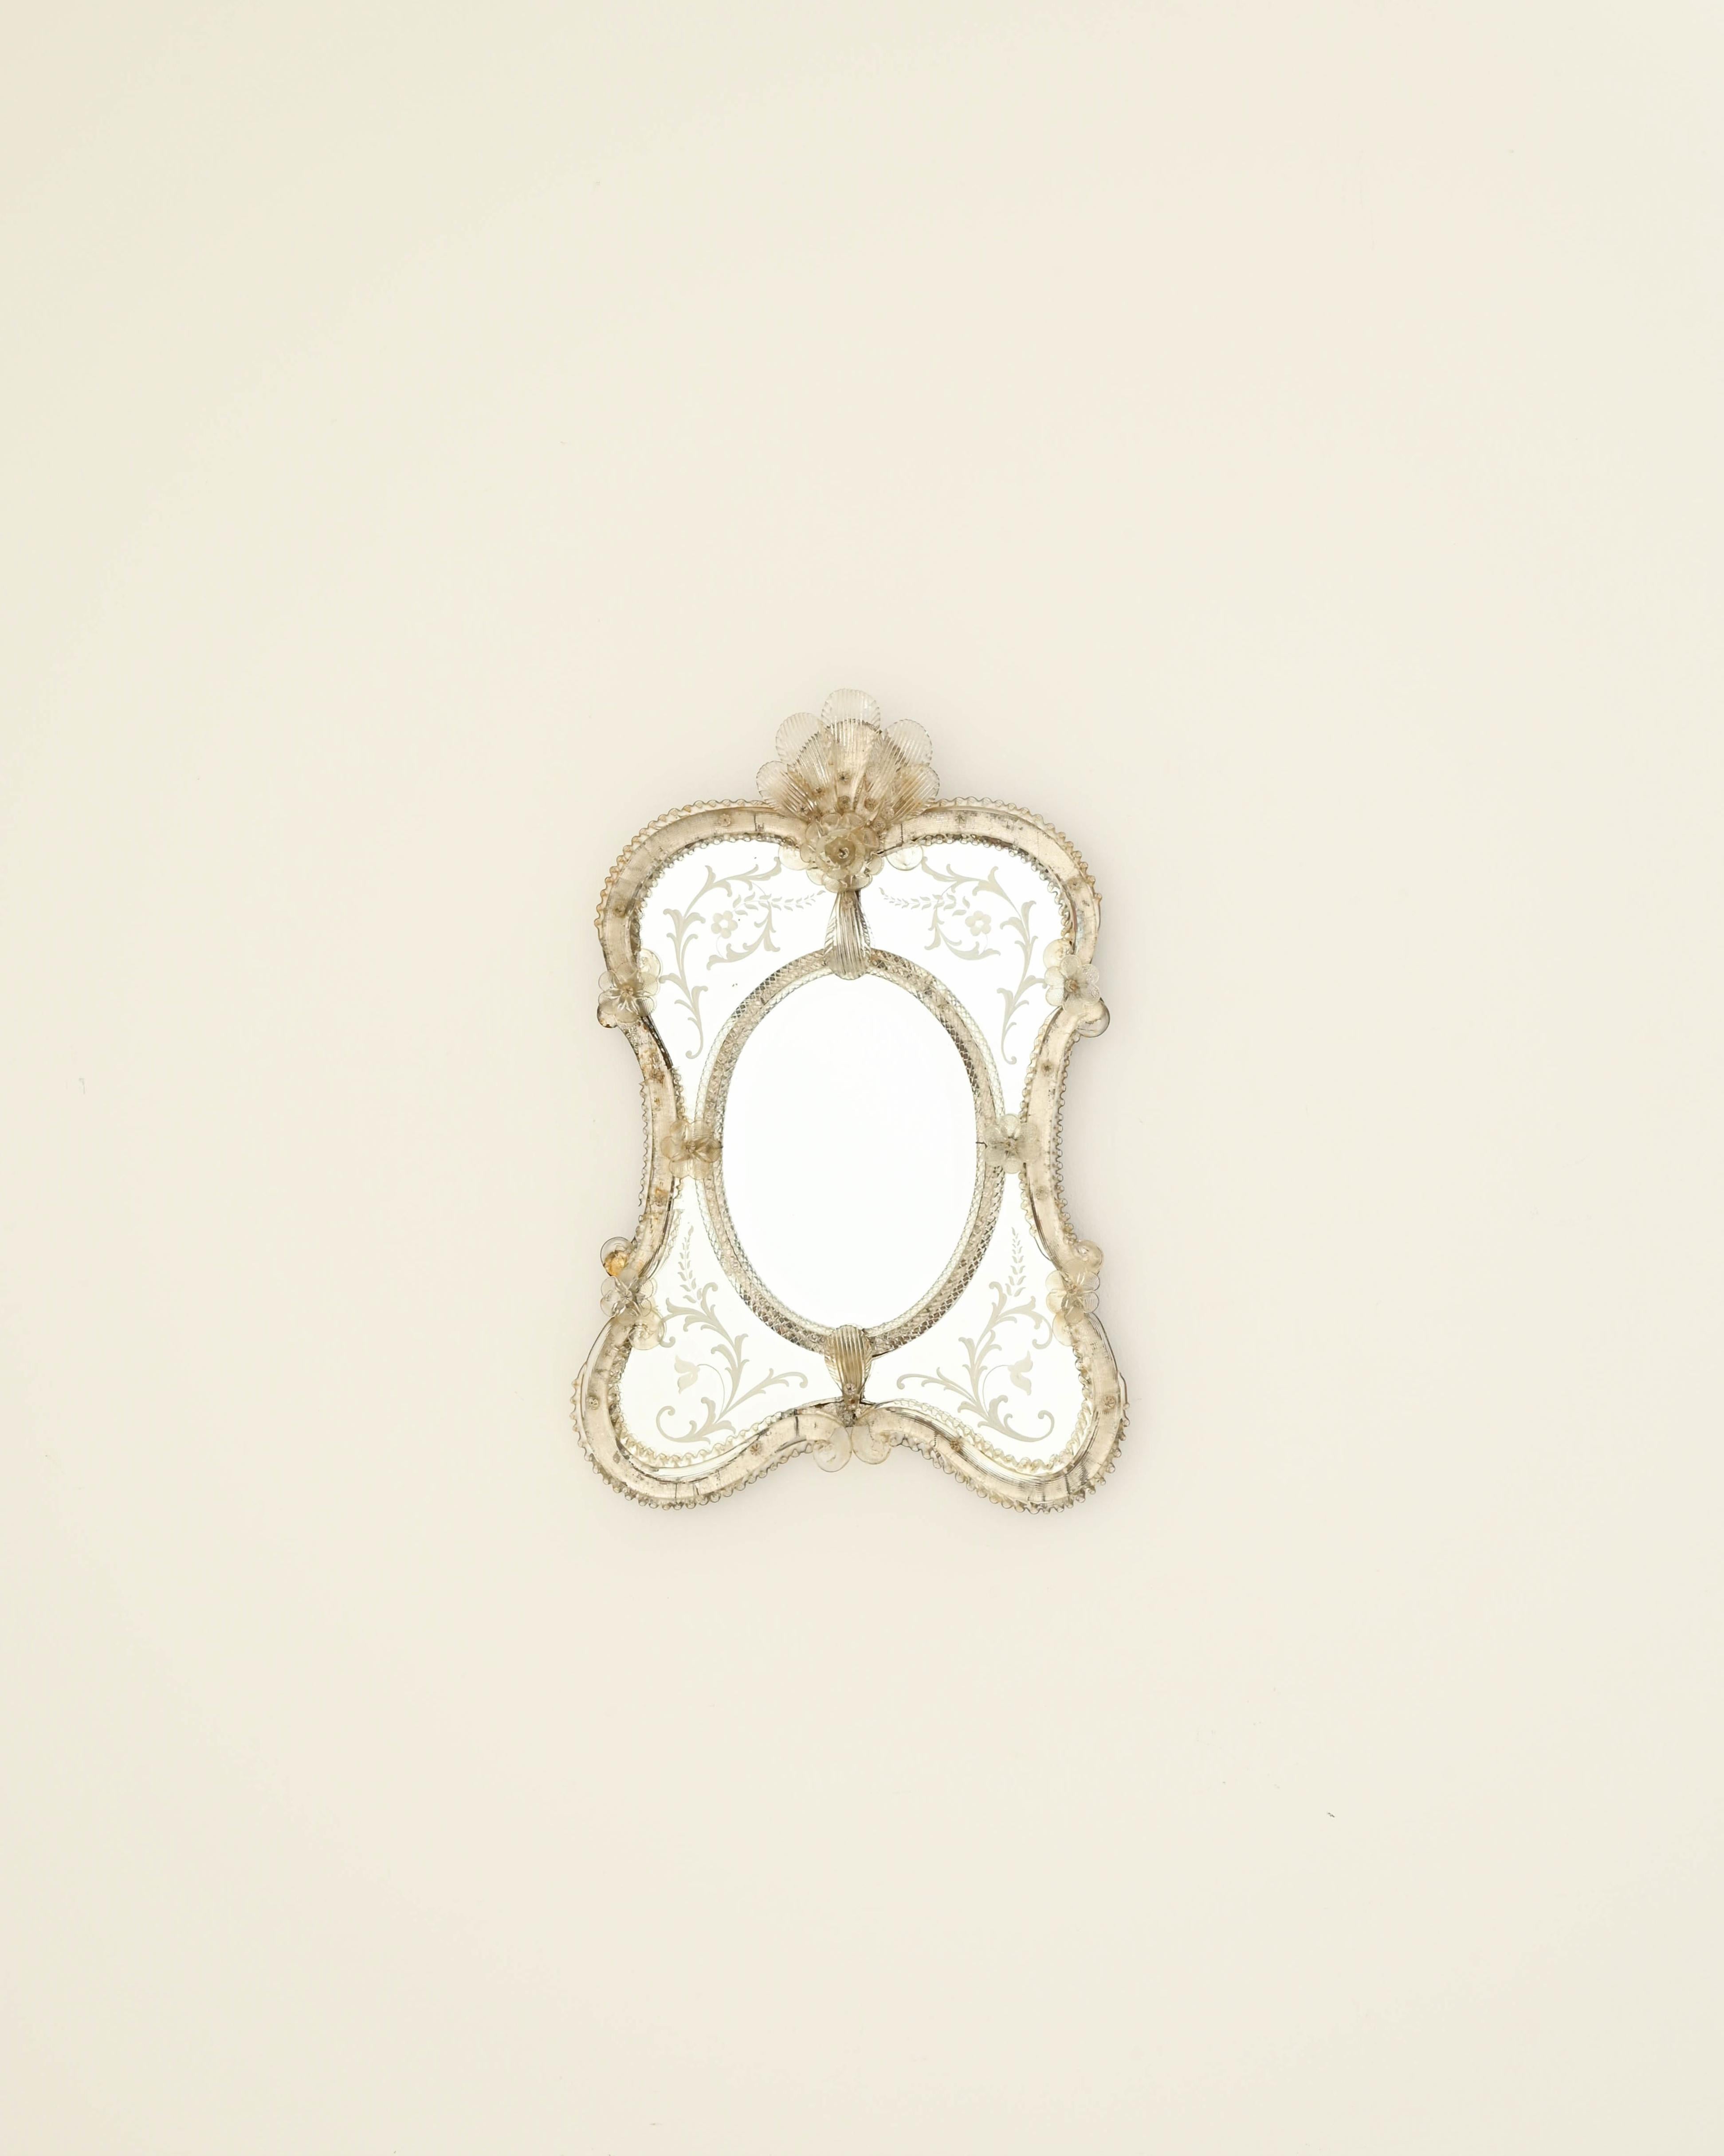 Crafted in Italy during the 20th century, this exceptional wall mirror showcases an exquisite, curvaceous shape with smoothly rounded corners and edges adorned with hand-crafted glass frills and scrolls, adding multidimensionality to its appeal. The